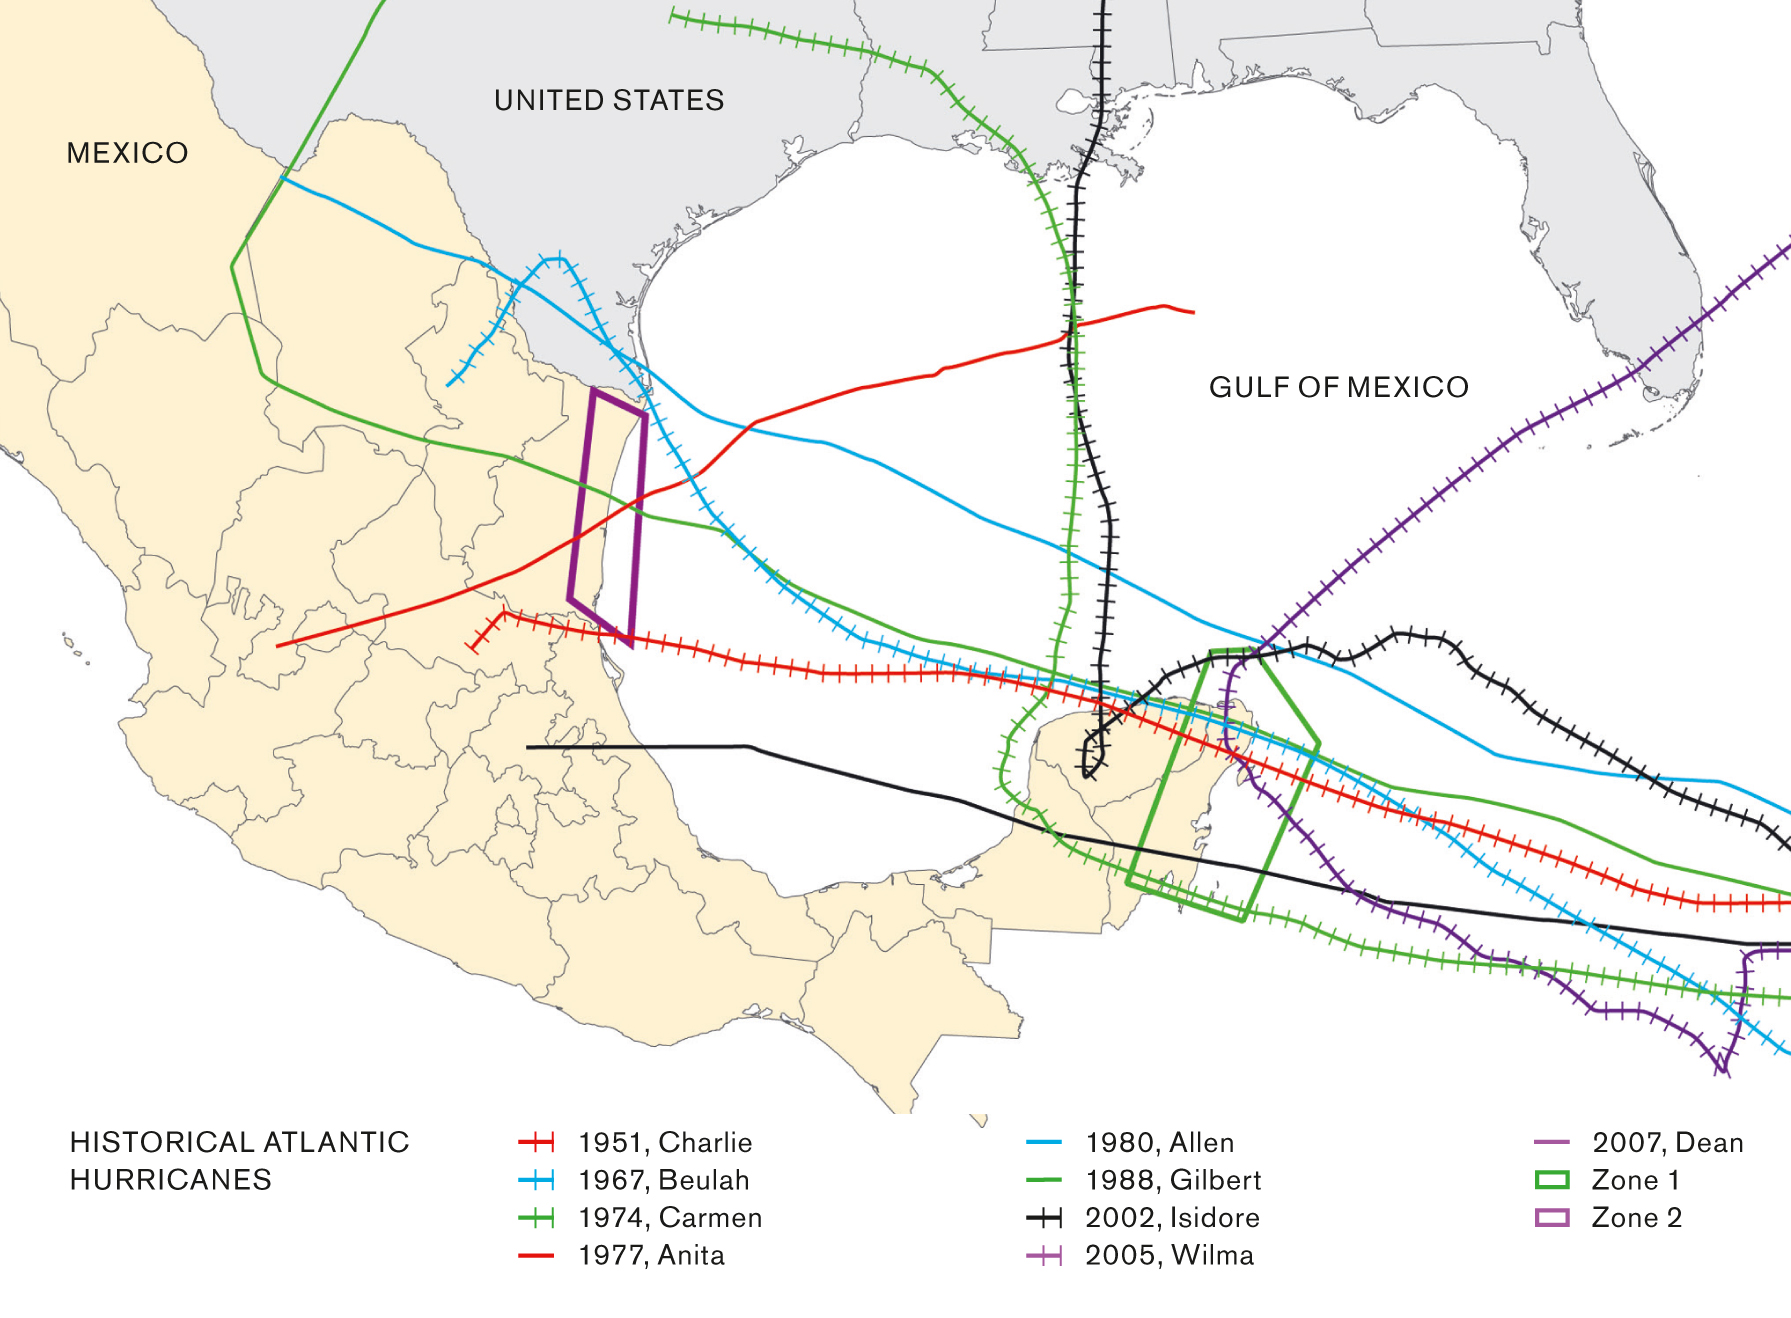 An image from a twenty twelve prospectus from the MultiCat Mexico company offering a catastrophe bond that covers both hurricanes and earthquakes in the Gulf of Mexico. The image shows a map of the region and the path of all the named storms that have passed through two designated zones, activity in which will determine whether the bond should be triggered. Four of these past storms would have met the parameters required to activate the bond. 